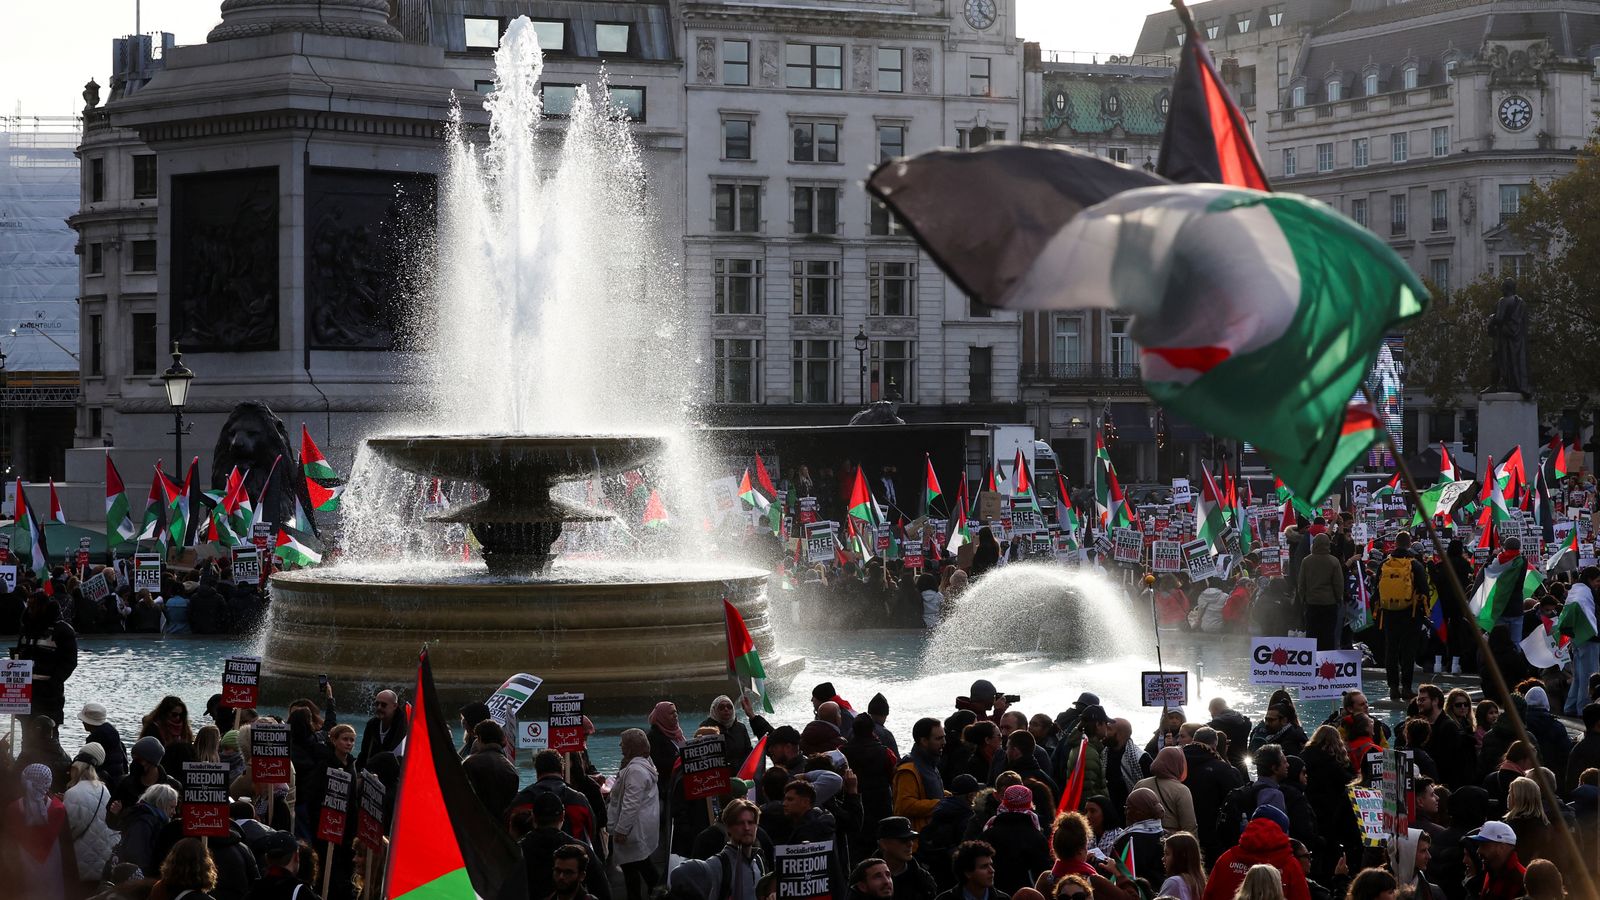 Pro-Palestinian protest on Armistice Day will go ahead - Met chief